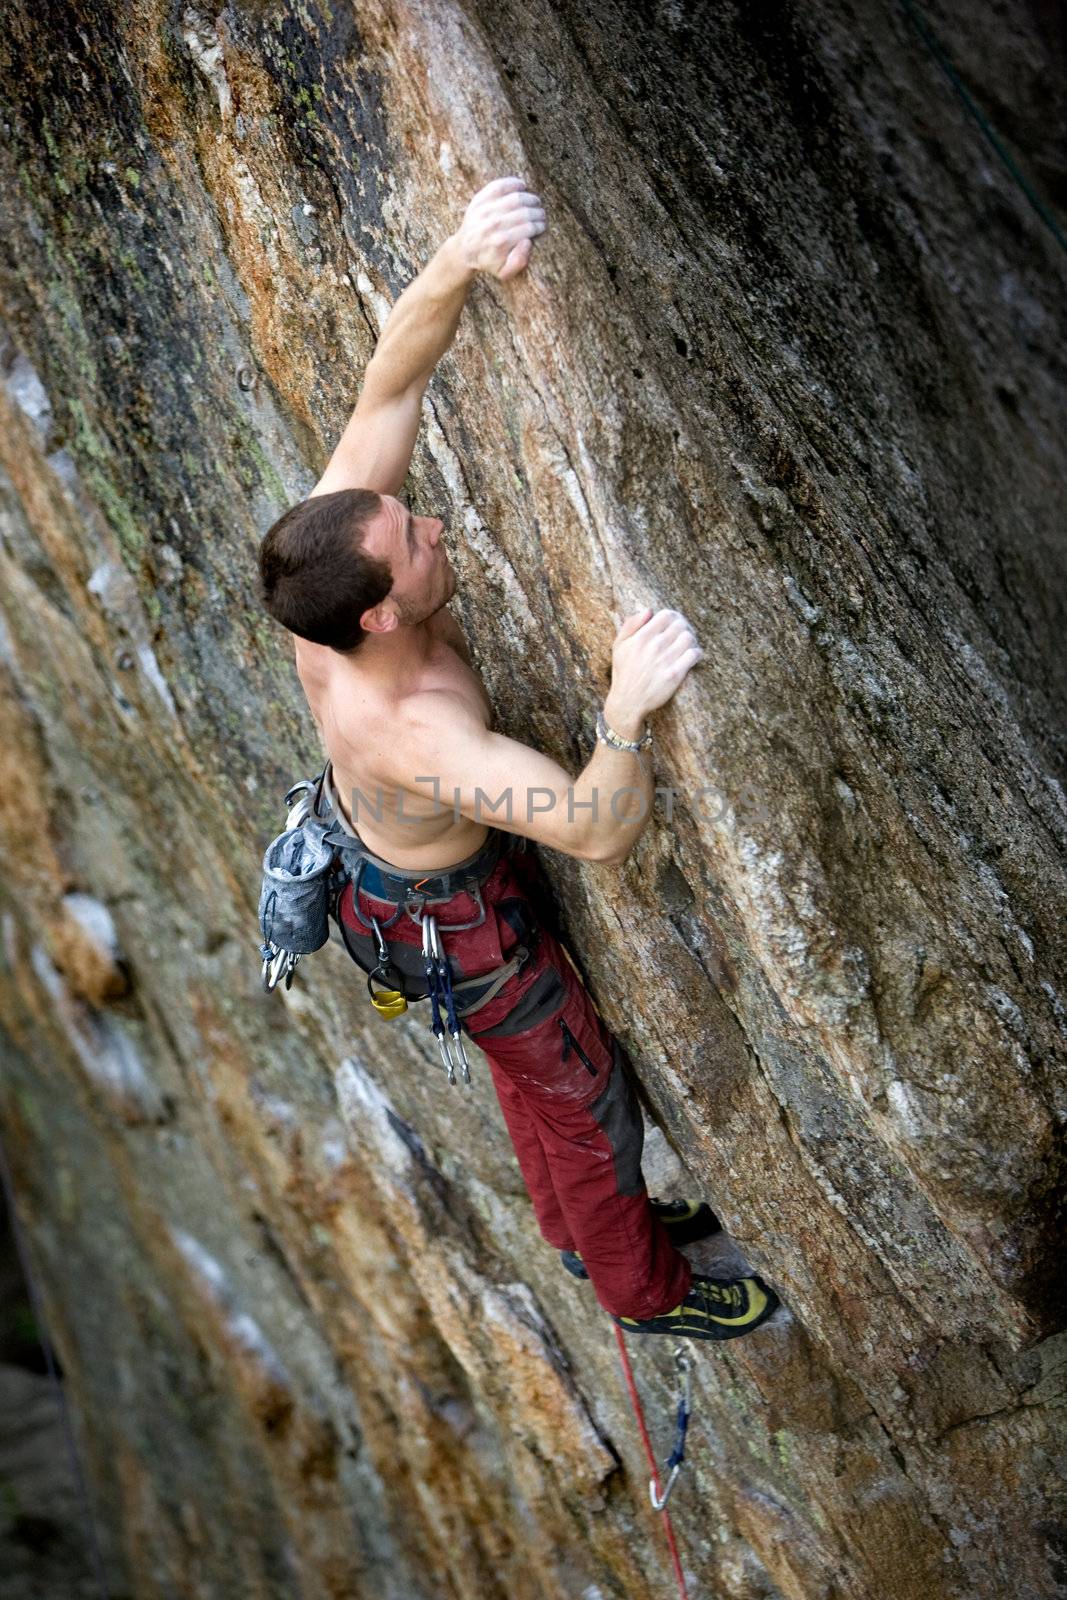 A male climber, viewed from above, climbs a very high and steep crag.